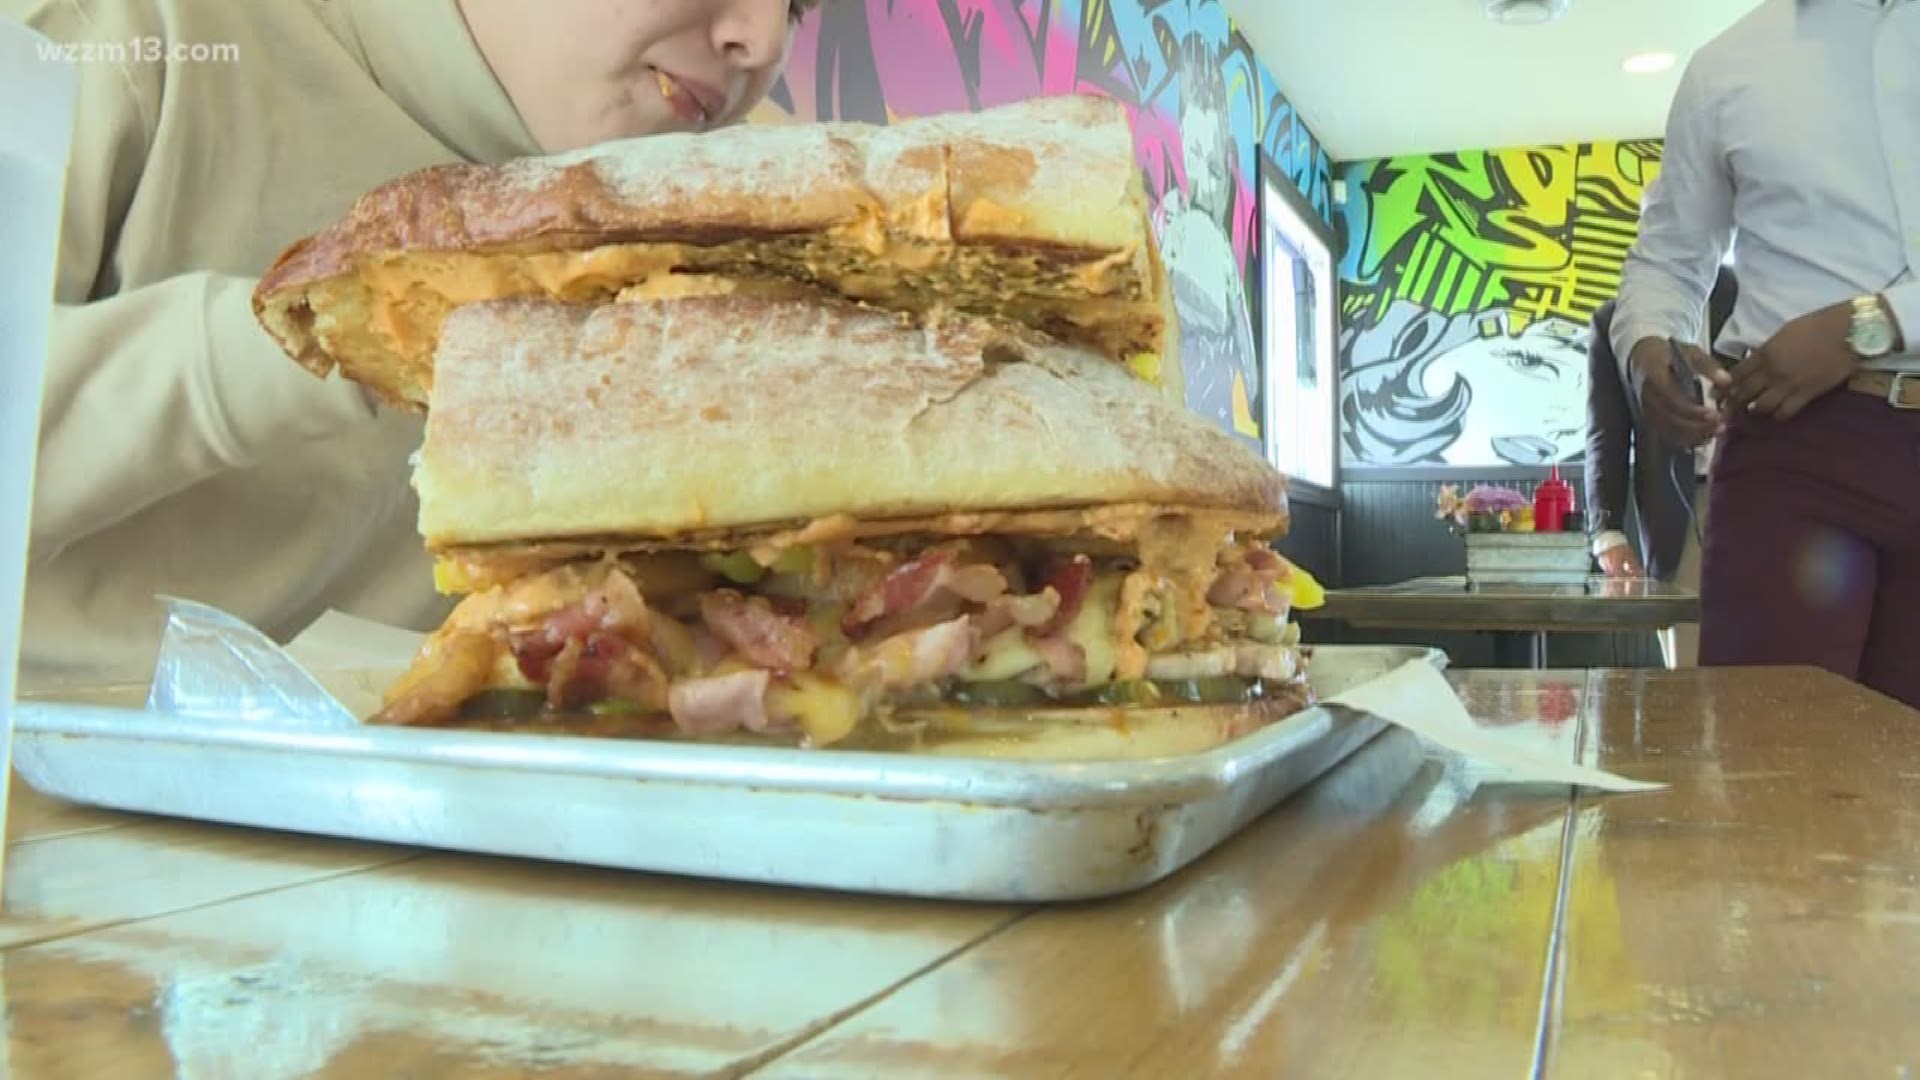 In this edition of "Let's Eat", Dave and James head out to the Lakeshore to take on a behemoth of a sandwich.